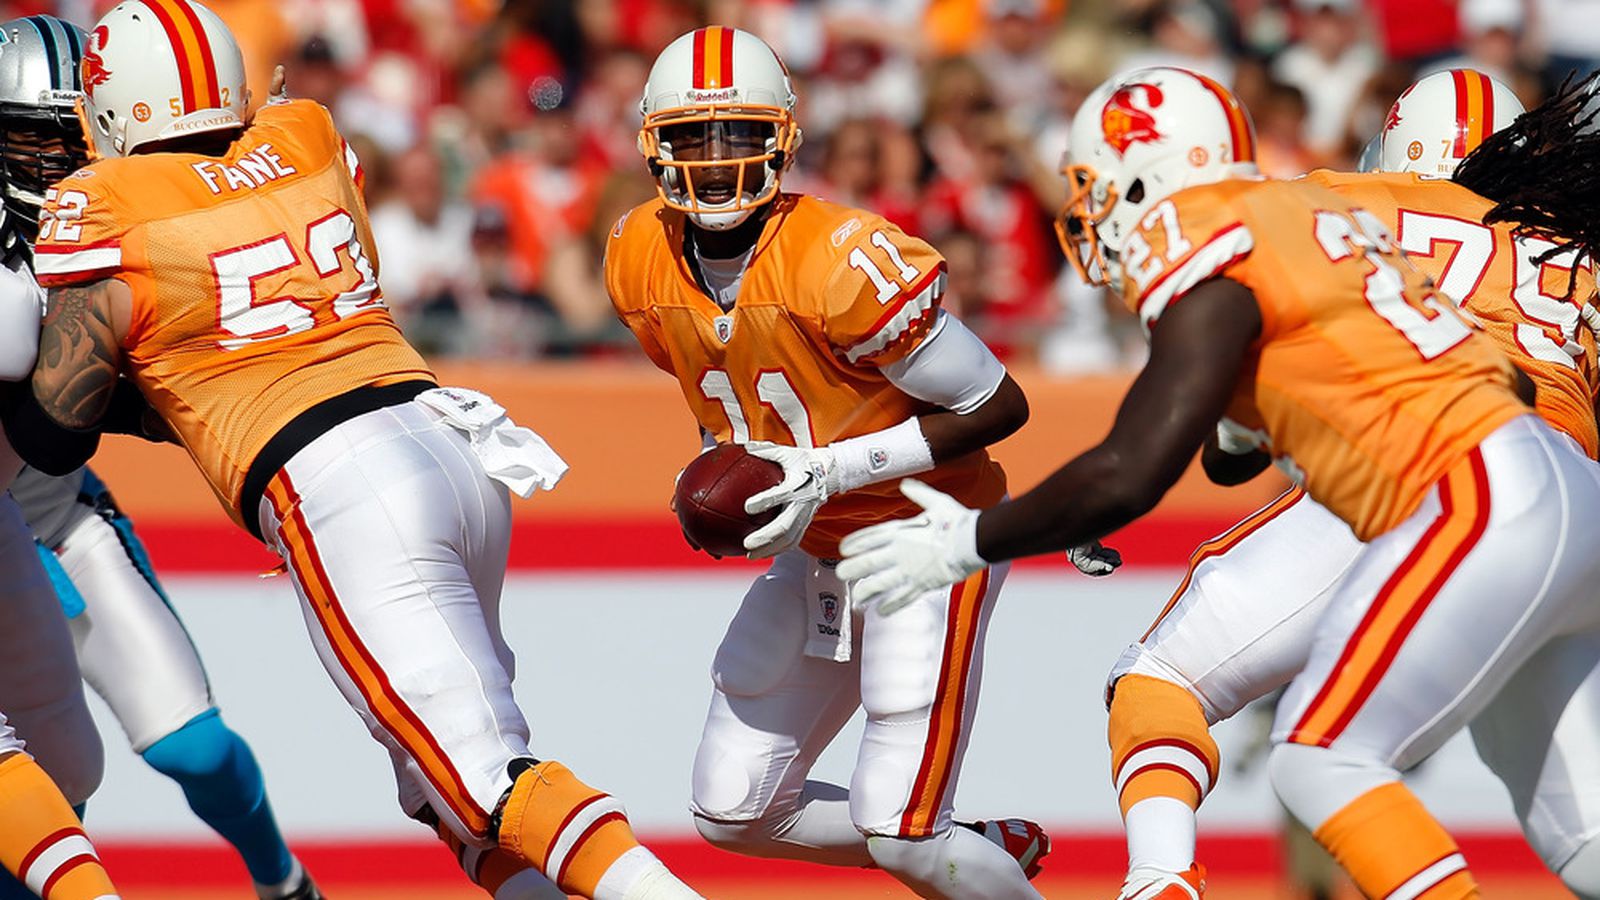 Buccaneers bringing back 'Creamsicle' uniforms, fans going crazy